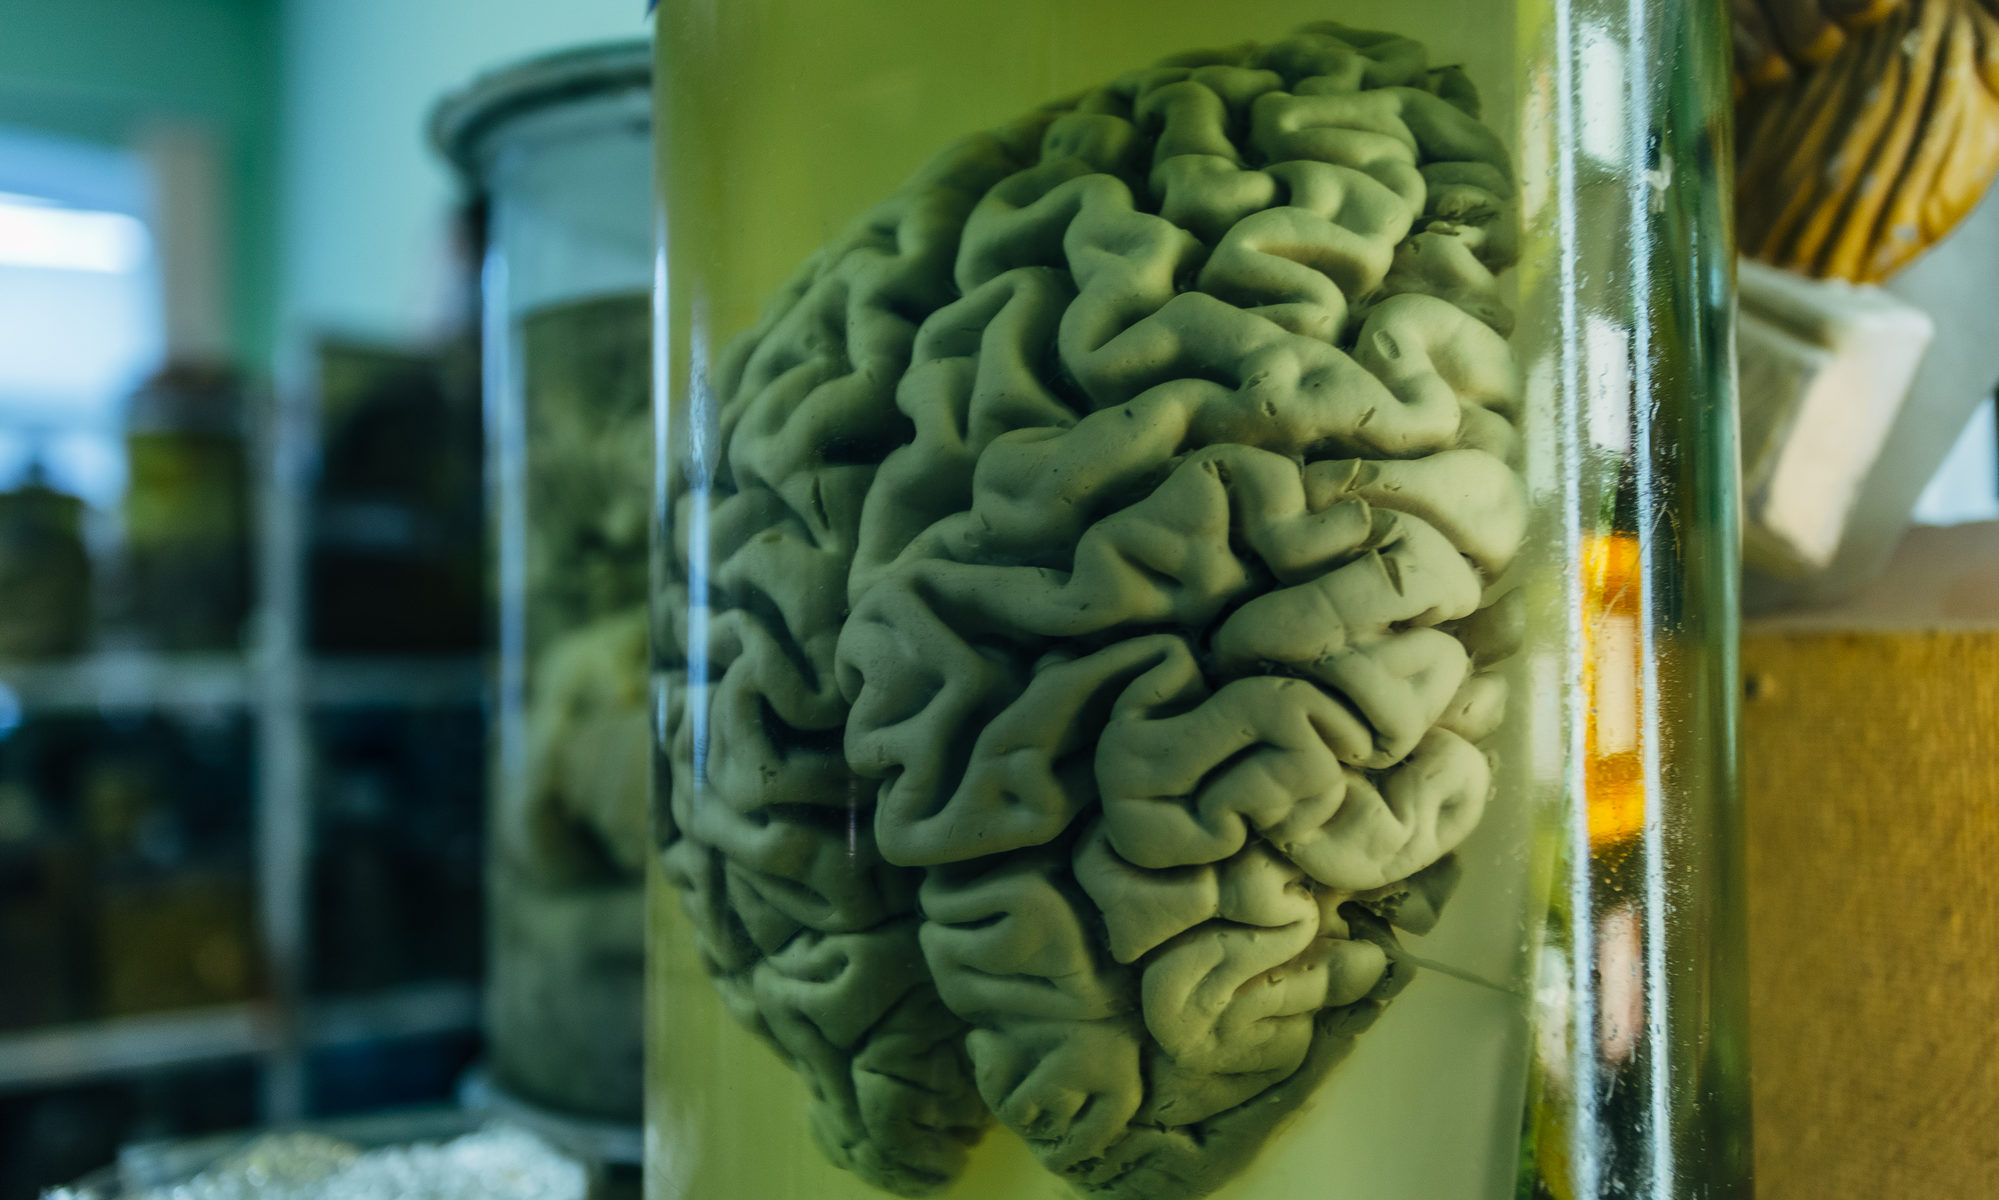 photograph of human brains in glass jars with formaldehyde